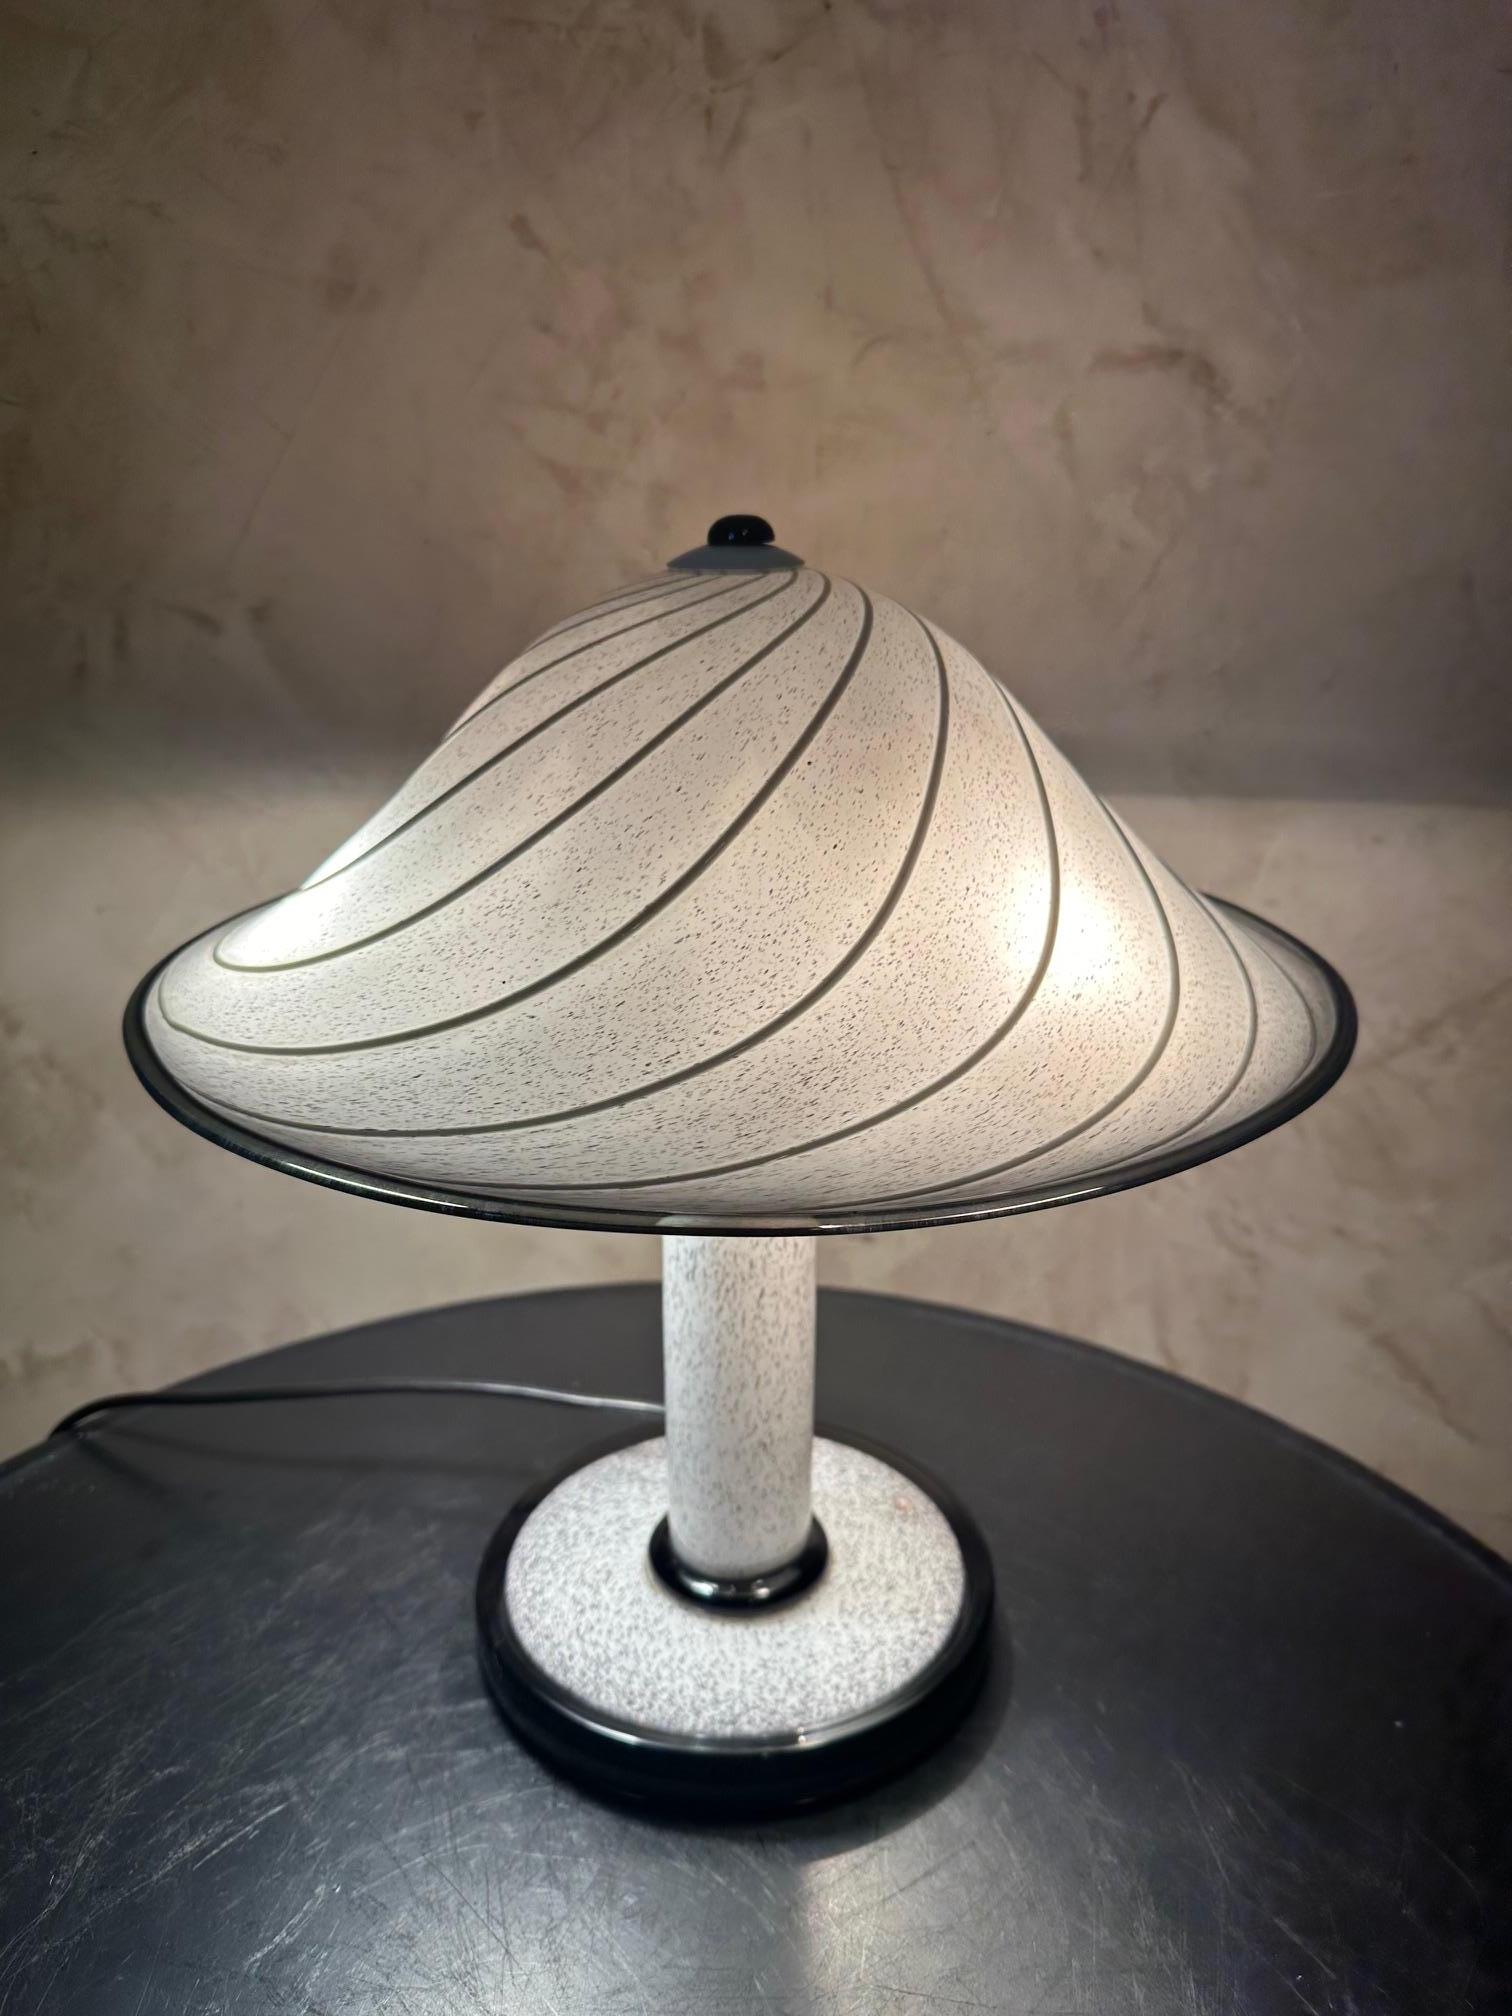 Magnificent Murano glass lamp dating from the 1950s in very good condition.
Color speckled white and black. Mushroom lampshade. 
Three screw bulbs. Manufacturer's label 